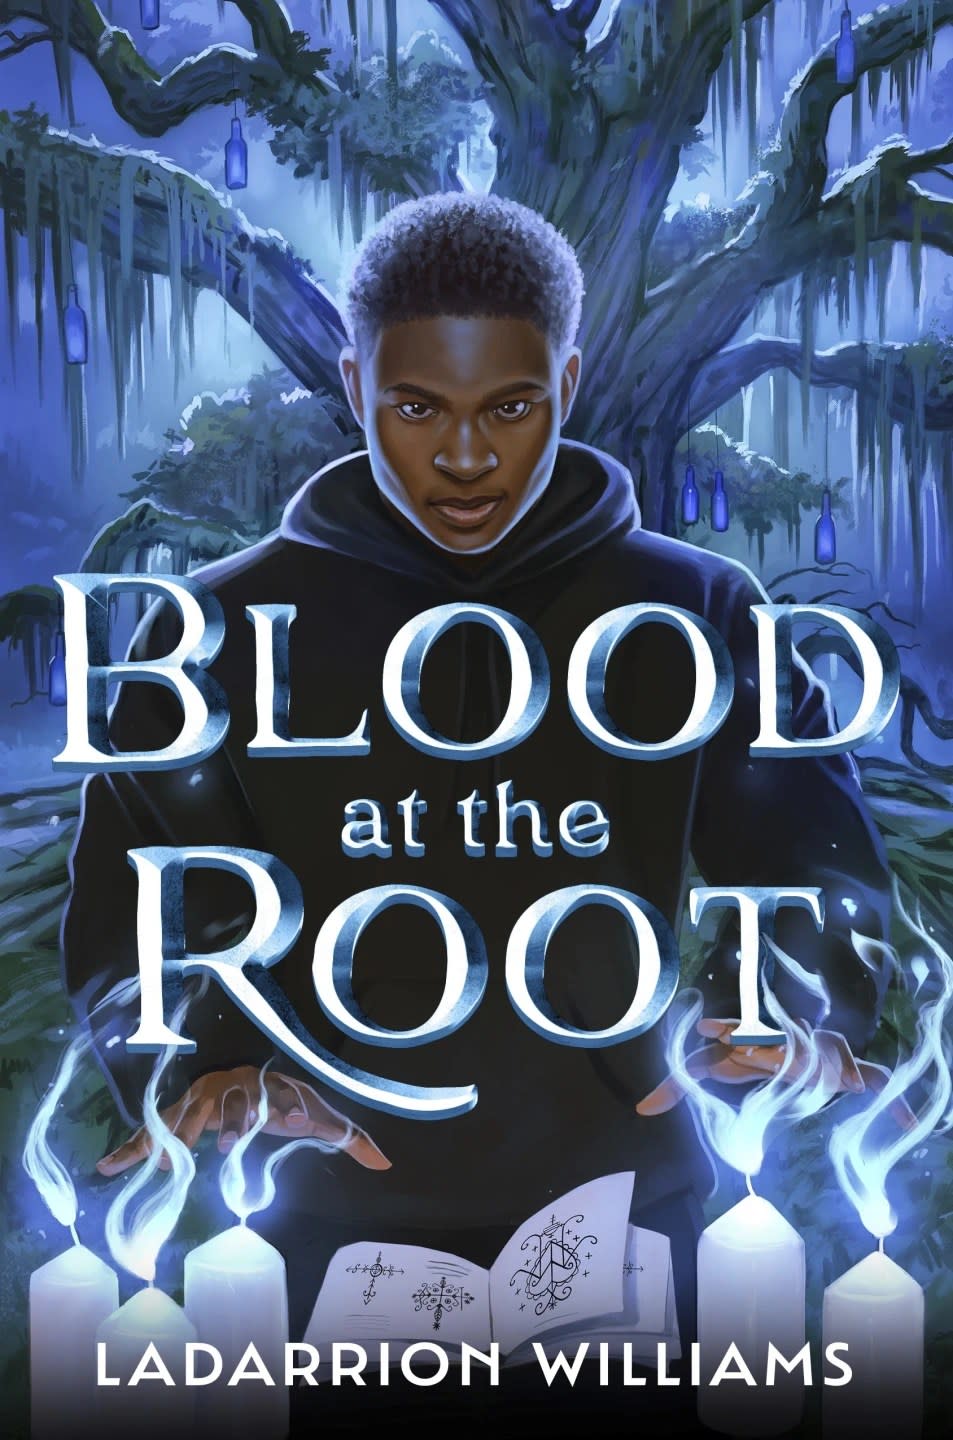 This cover image released by Labyrinth Road shows “Blood of the Root” by LaDarrion Williams. (Labyrinth Road via AP)